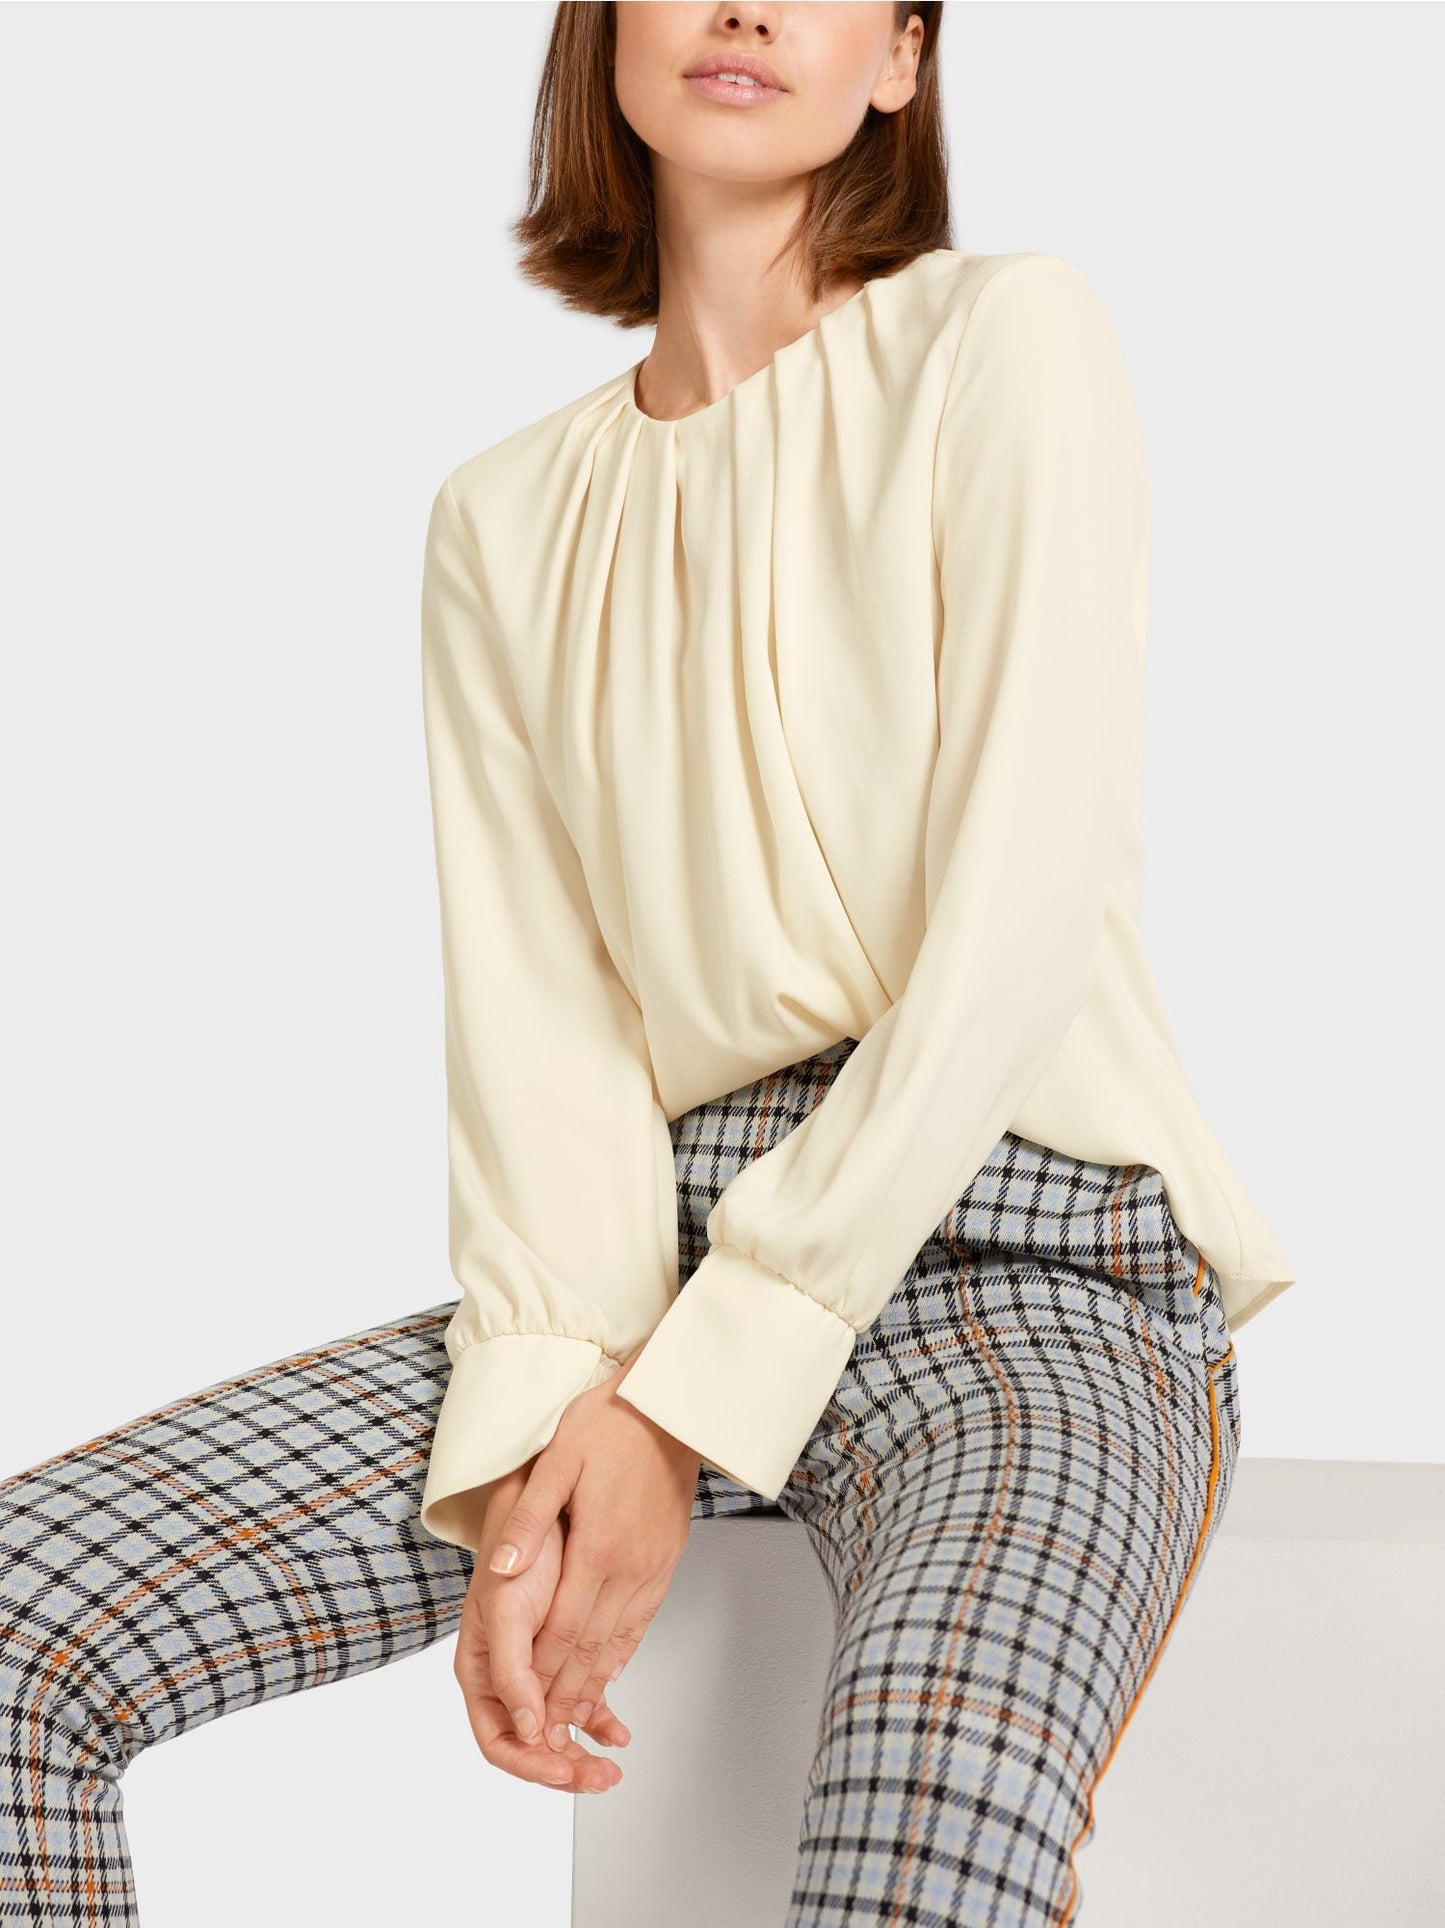 Blouse-Style Top with Cream Pleats